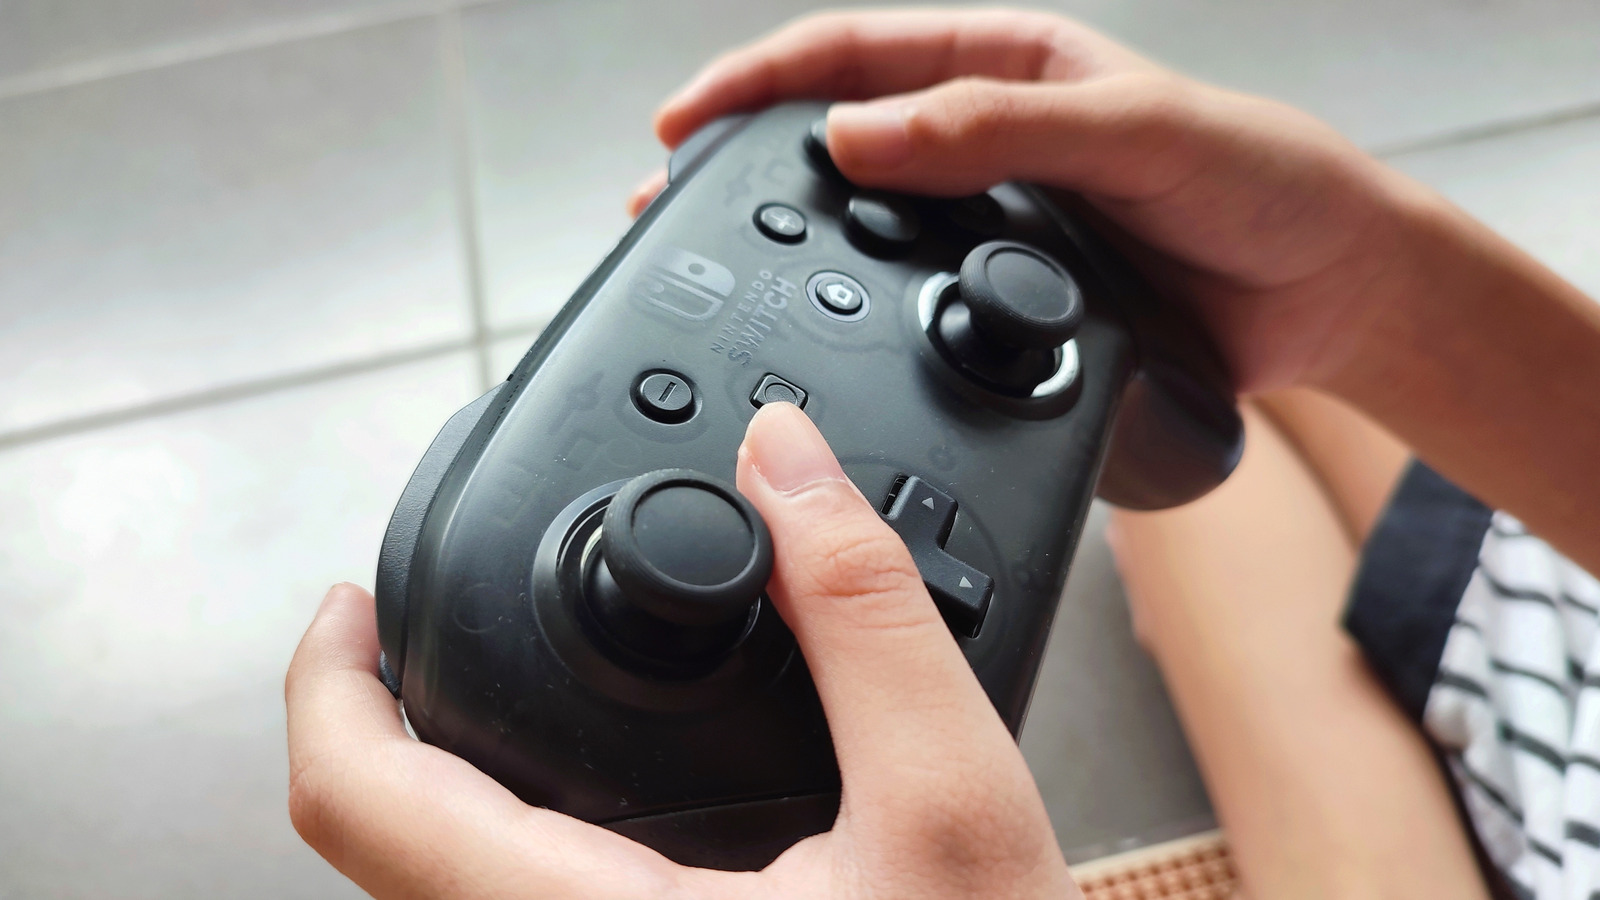 Here's why the Nintendo Switch Pro controller is so special